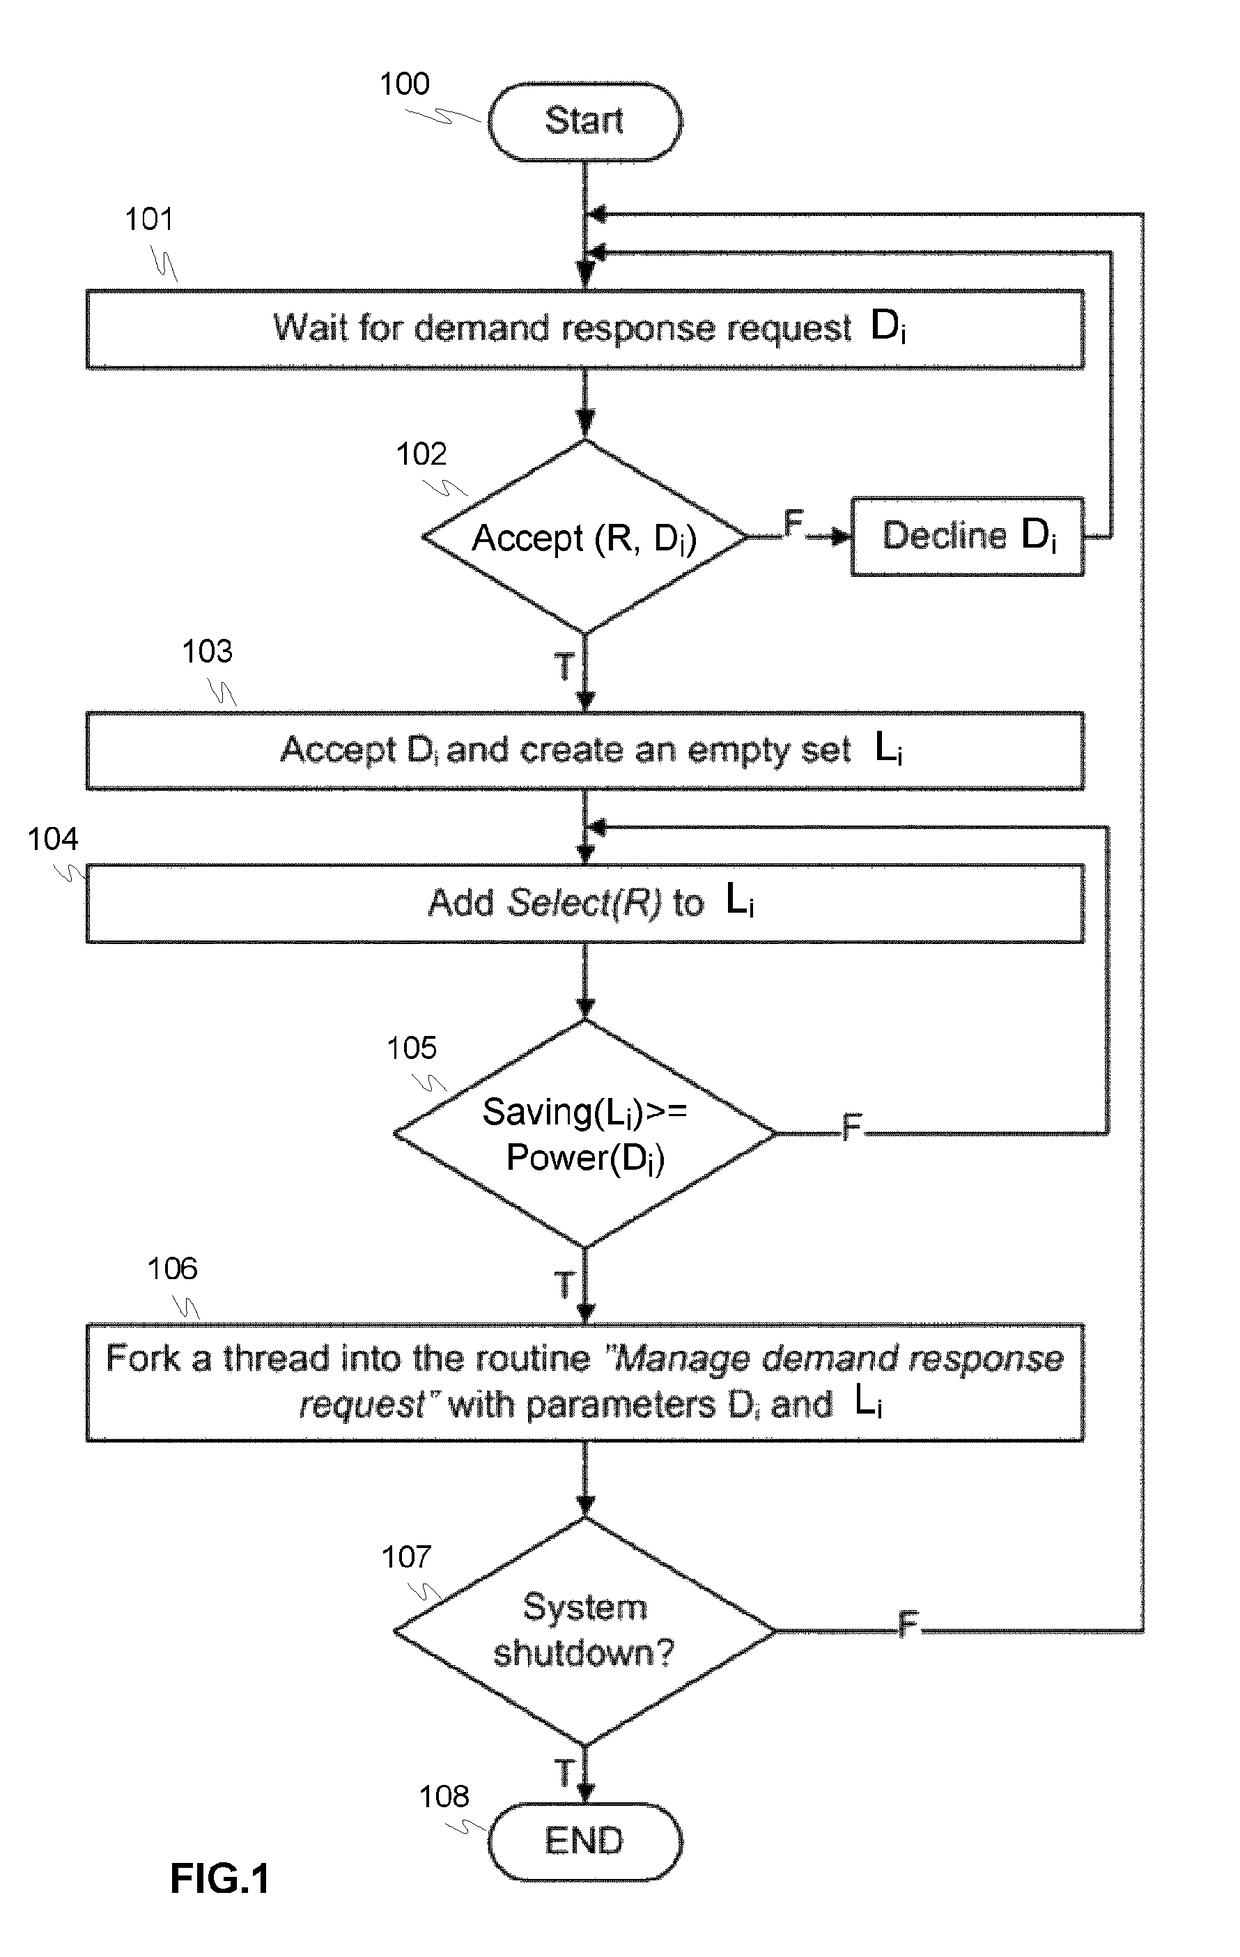 Method and system for controlling a lighting network